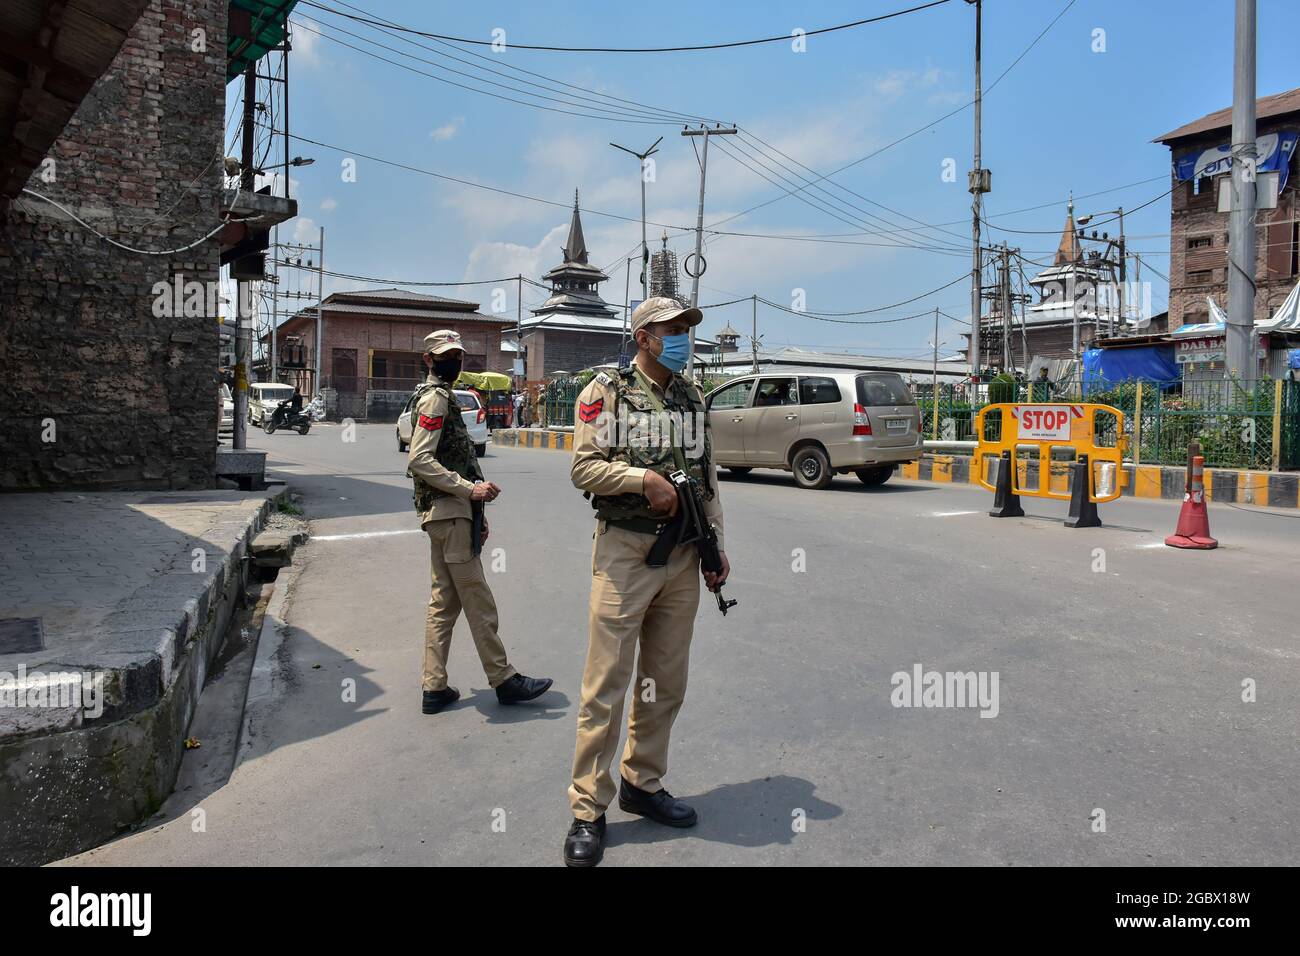 Government forces stand alert after an explosion took place near the Grand Mosque on the second anniversary of the abrogation of autonomous status and statehood in Srinagar.An explosion took place near the Grand Mosque on Thursday, but no losses of life or injury were reported, officials said. They said the explosion, suspected to be an Improvised Explosive Device (IED), took place around noon. The explosion took place on the second anniversary of the abrogation of autonomous status and statehood. (Photo by Saqib Majeed/SOPA Images/Sipa USA) Stock Photo